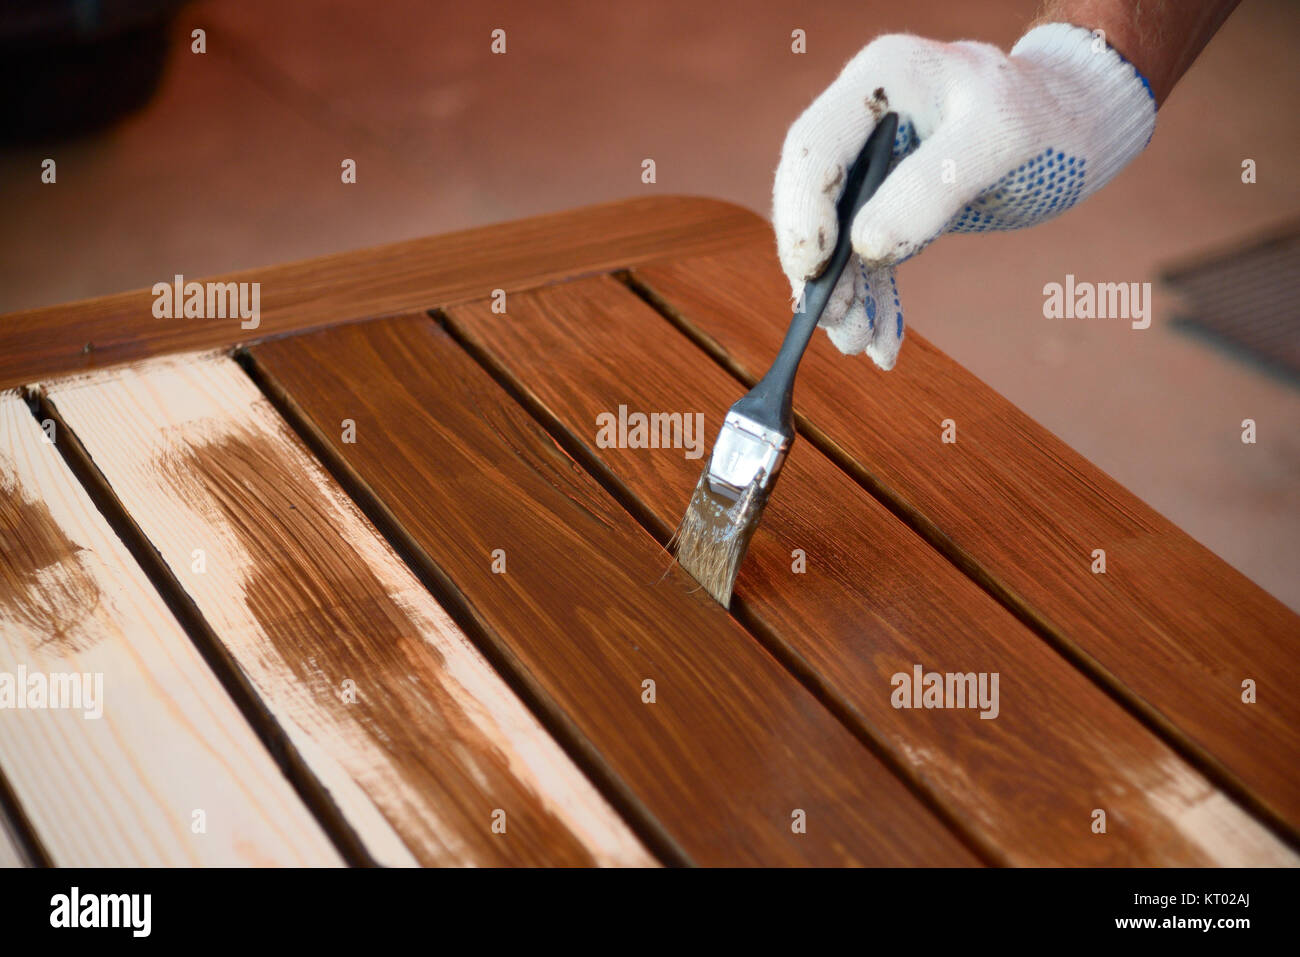 Hand with a brush paints a wooden surface with brown paint, close up Stock Photo